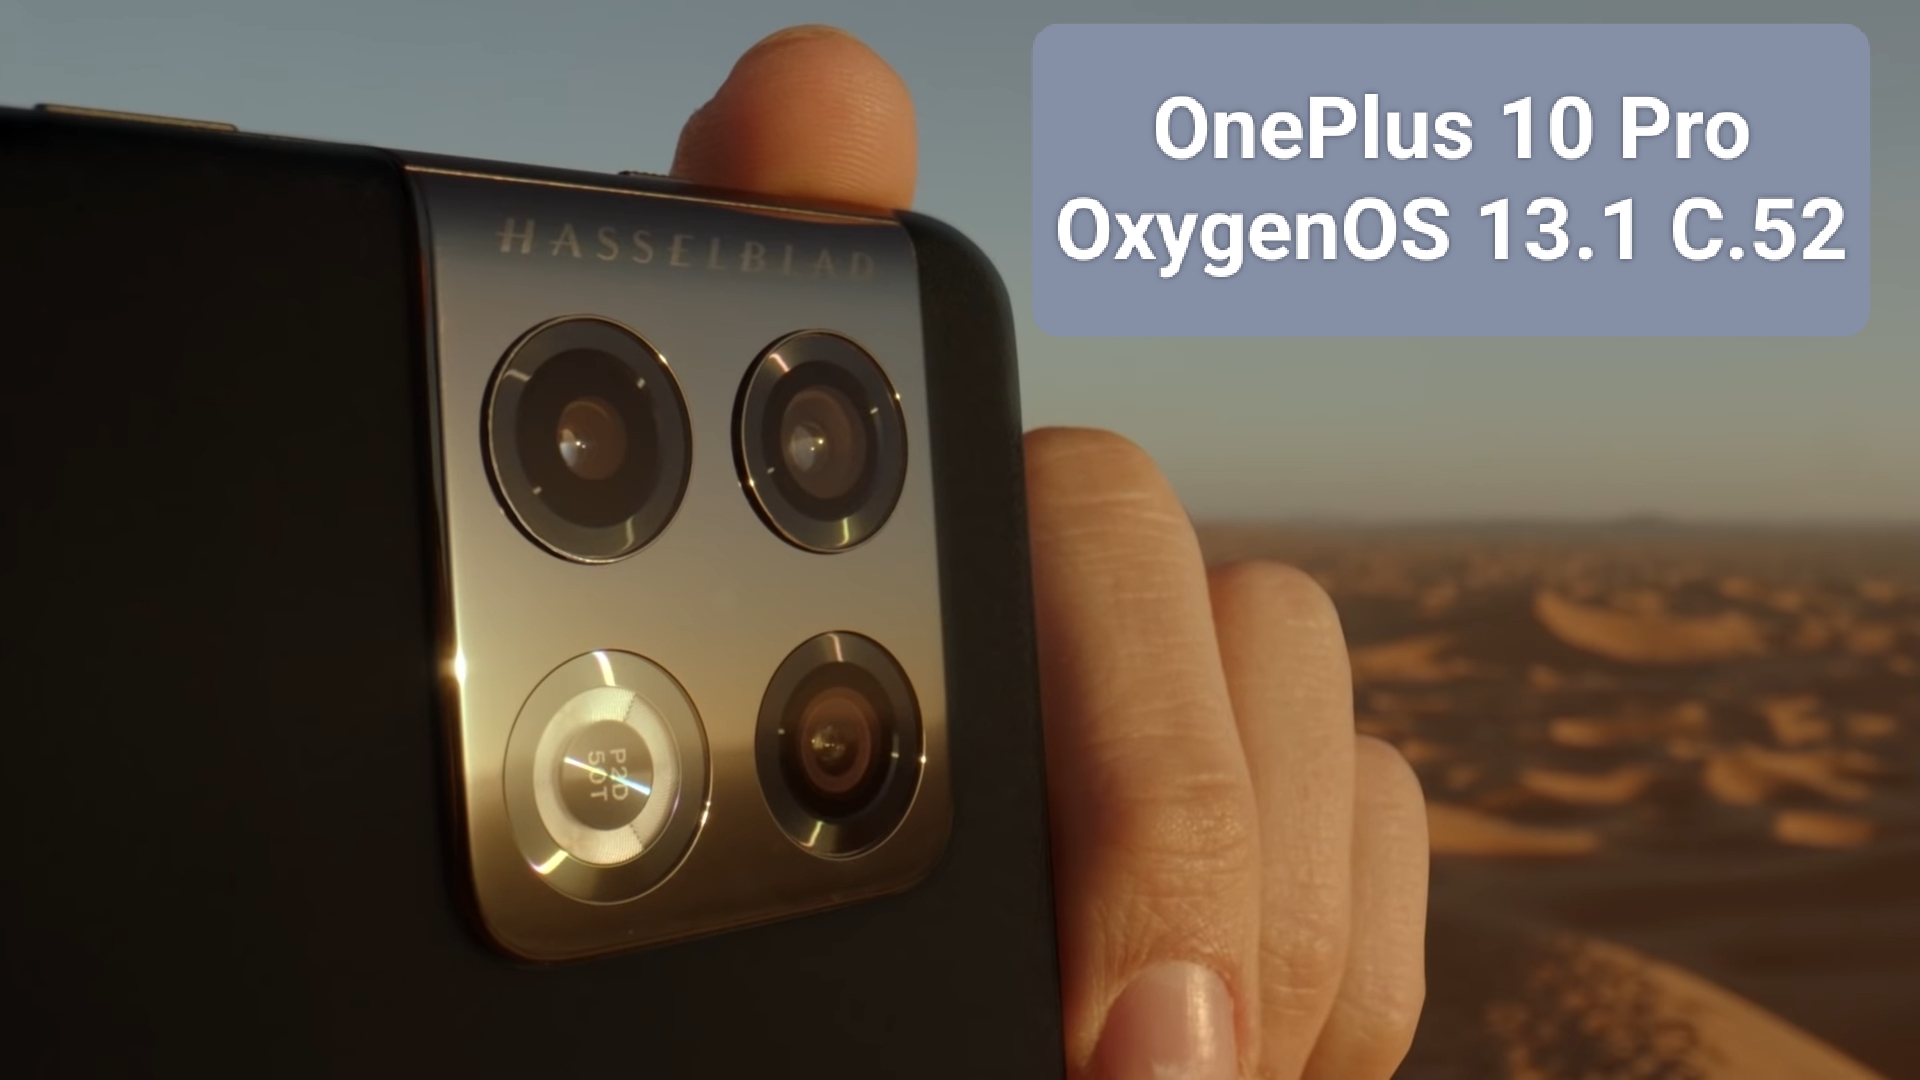 oneplus 10 pro 5g (oxygenos 13.1 c.52 ota update) - the go android